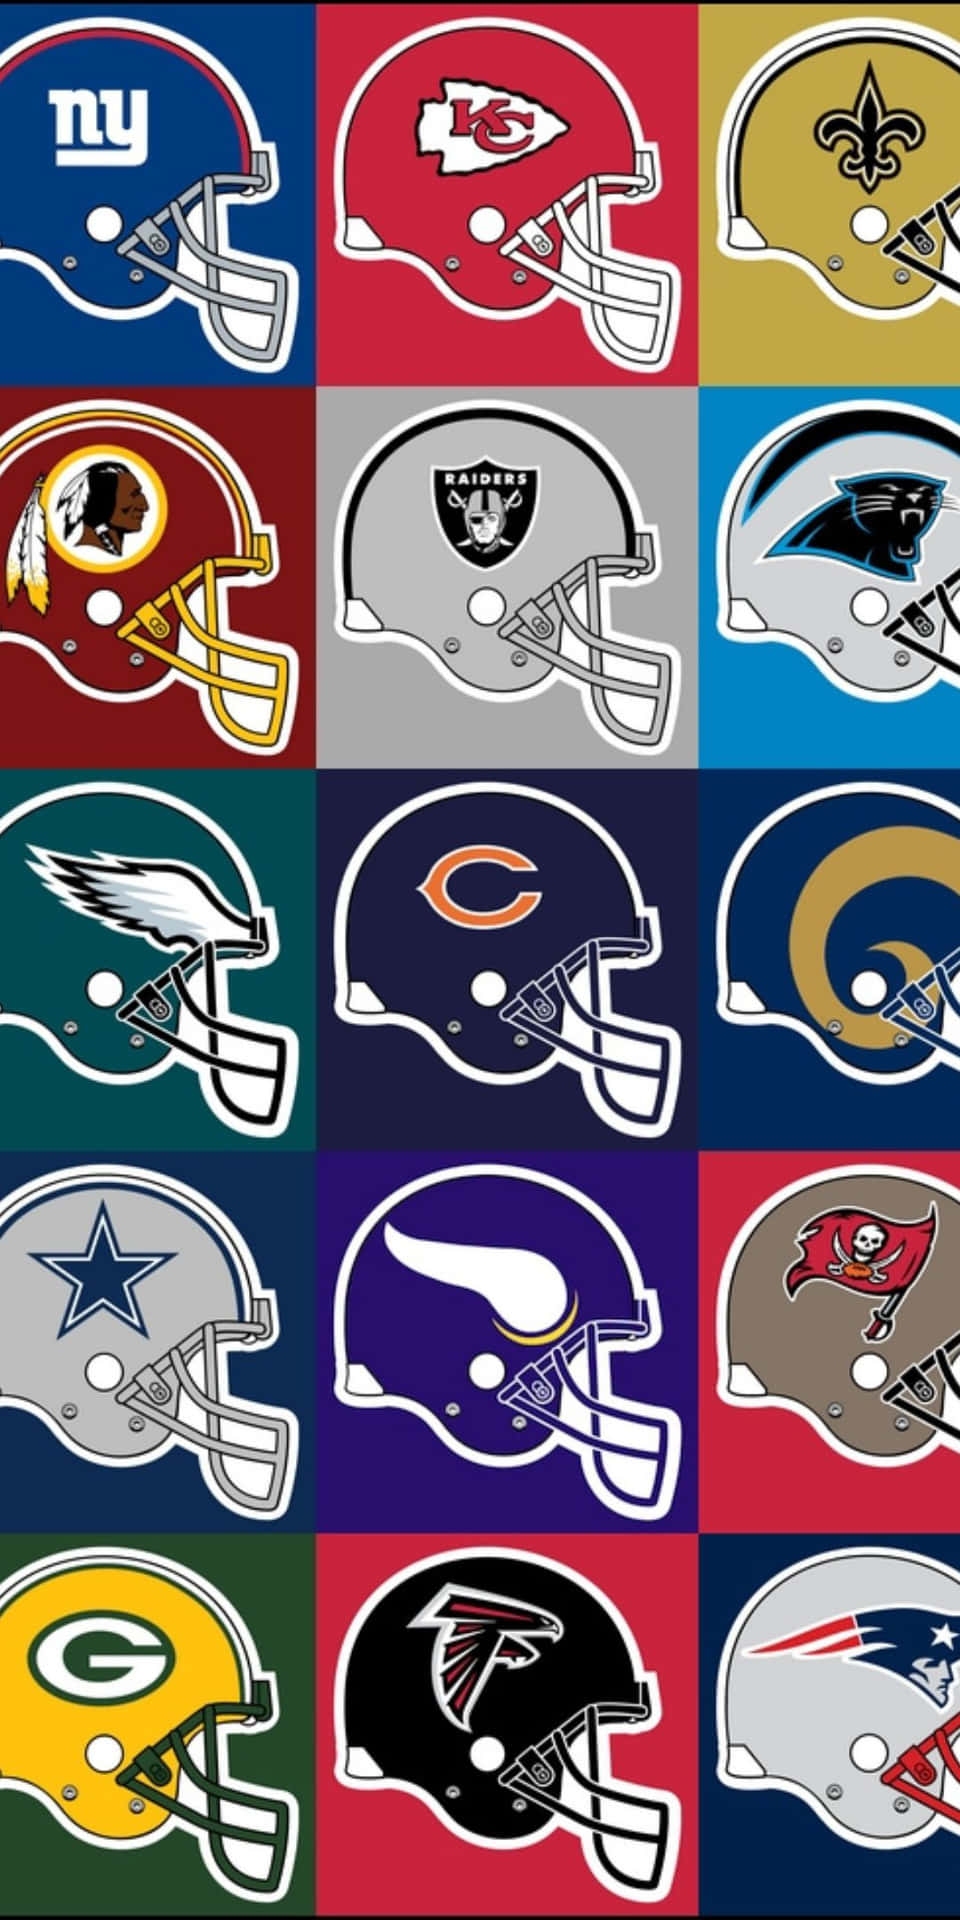 100+] Nfl Teams Background s for FREE 